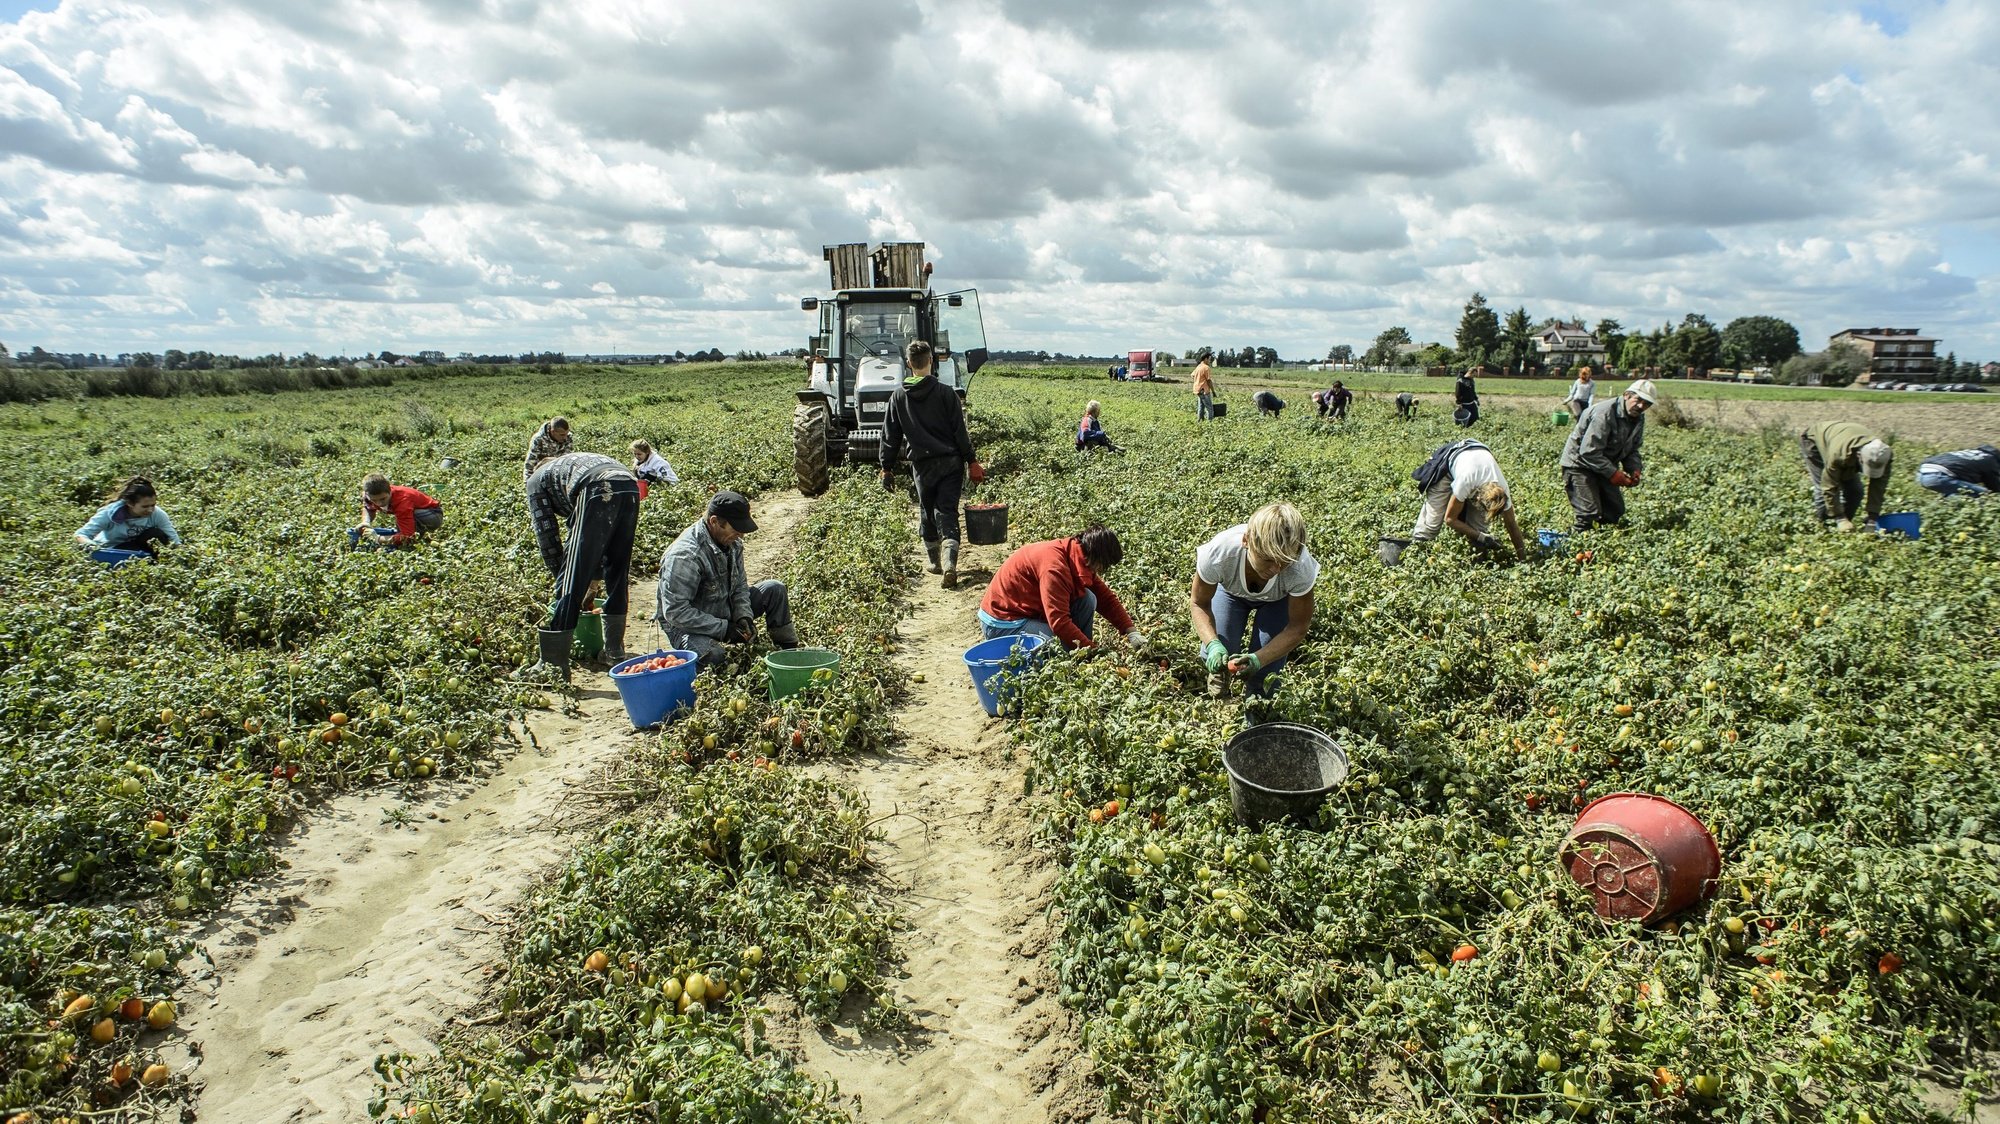 epa04367583 Farmers and helpers harvest tomatoes at the Grzegorz Tokarski farm in Gorne, eastern Poland, 25 August 2014. Tomatoes will go directly to the processing plant. The tomato harvest will last until October.  EPA/WOJCIECH PACEWICZ POLAND OUT